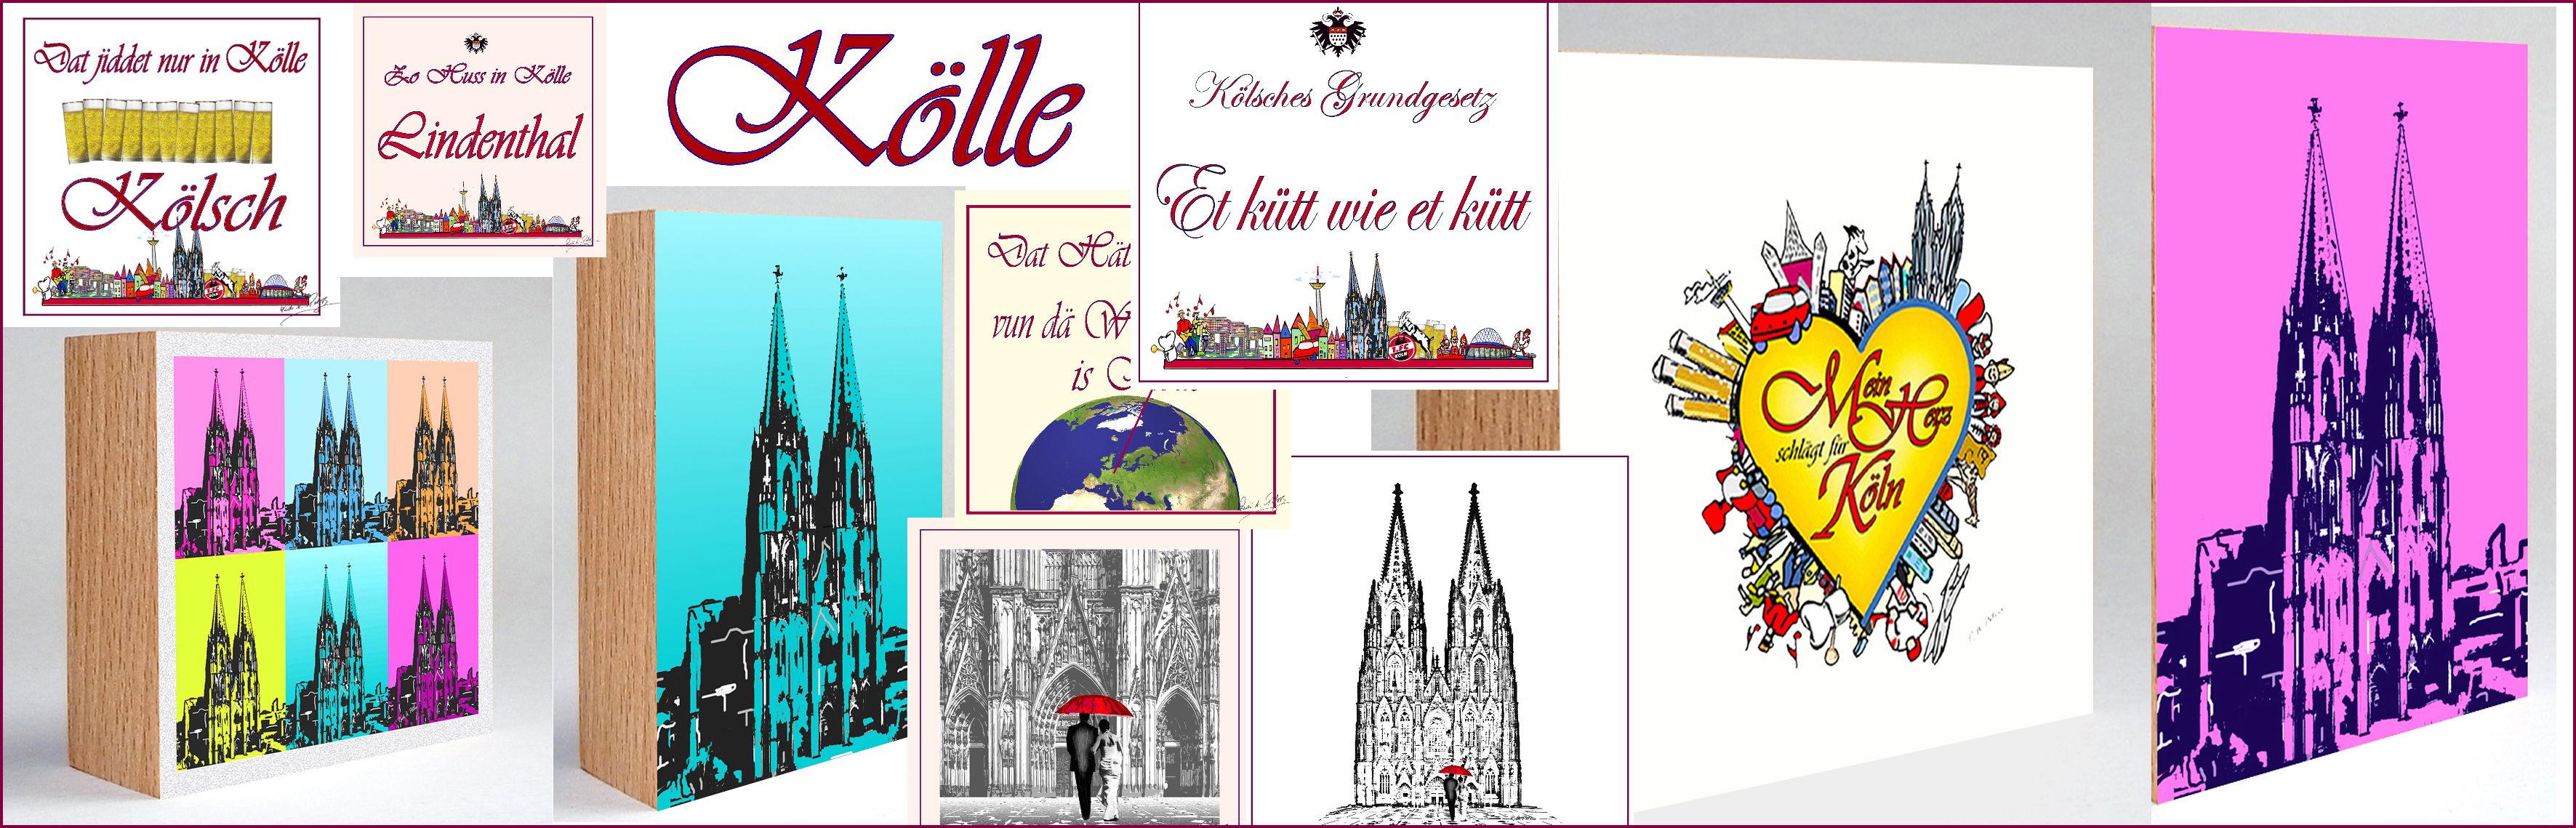 Front_Koelle_web